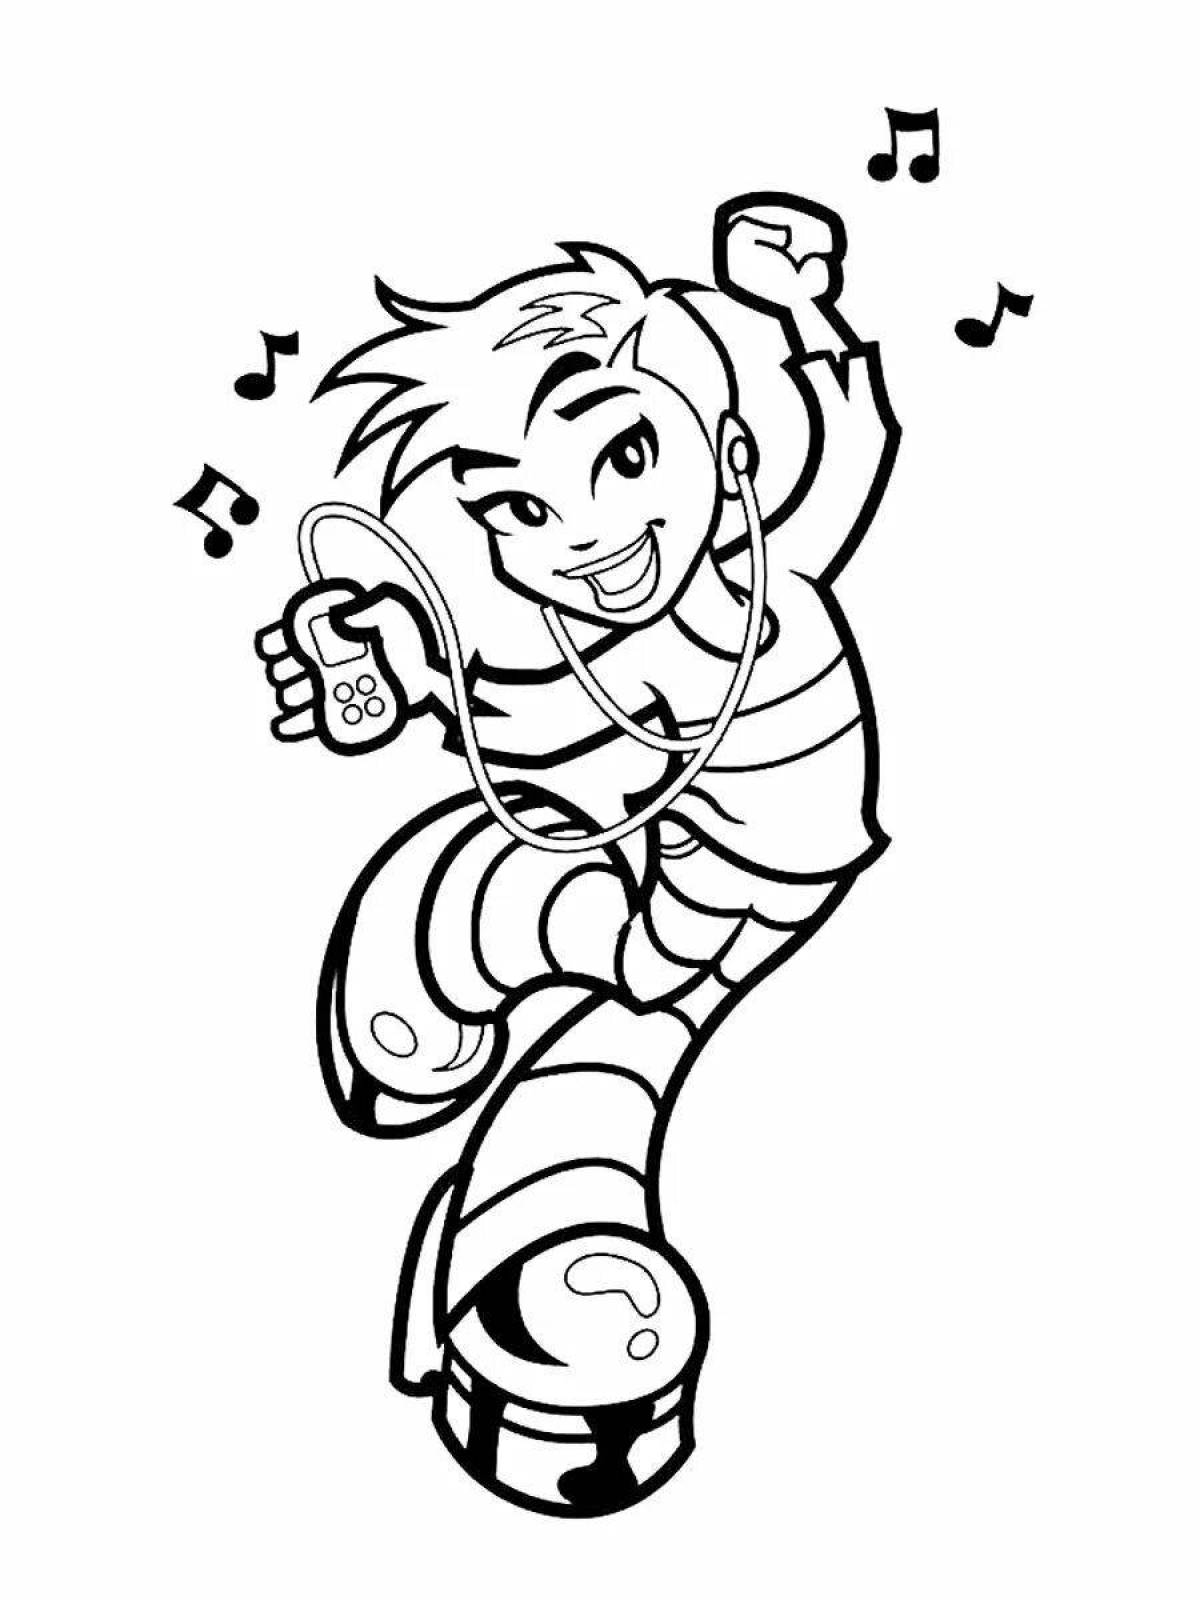 Coloring page playful dancer